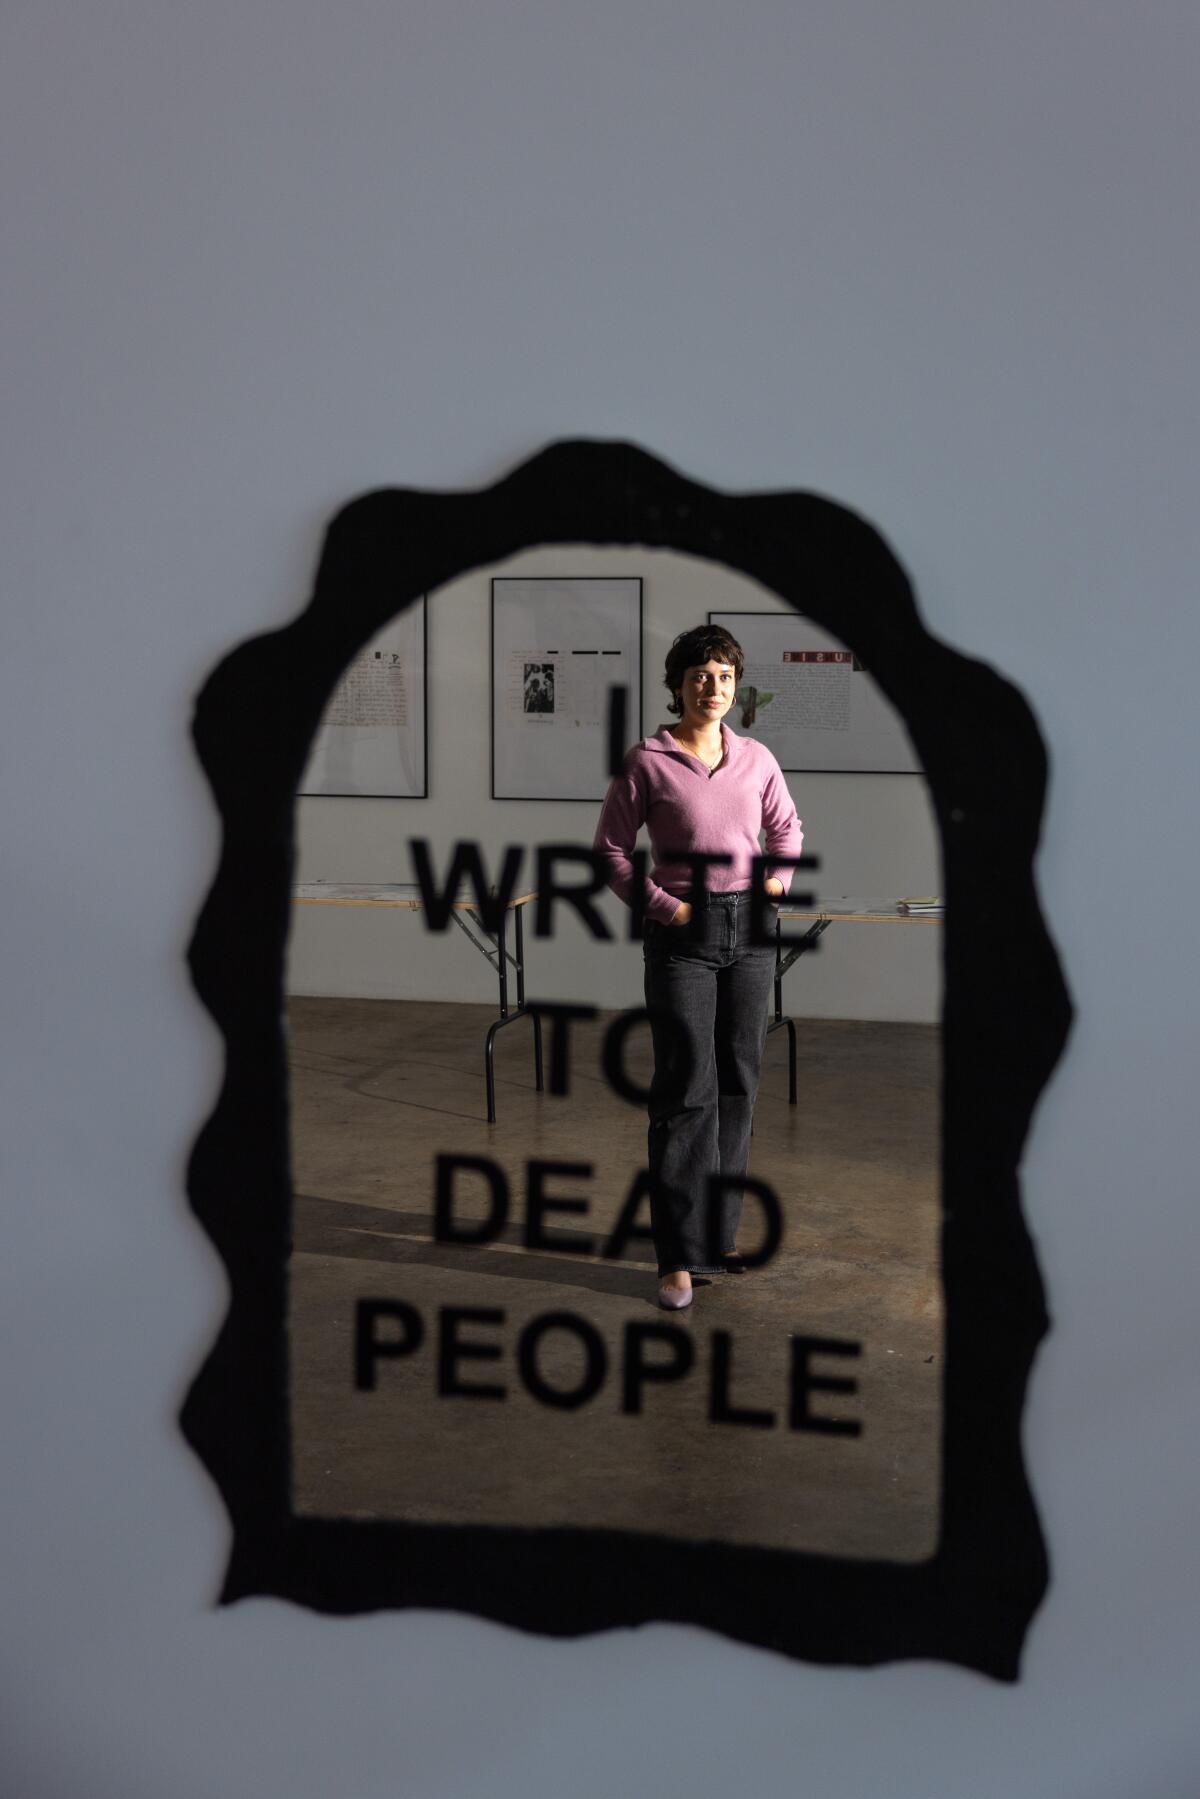 Artist Janelle Ketcher's reflection in a mirror that reads "write to dead people."